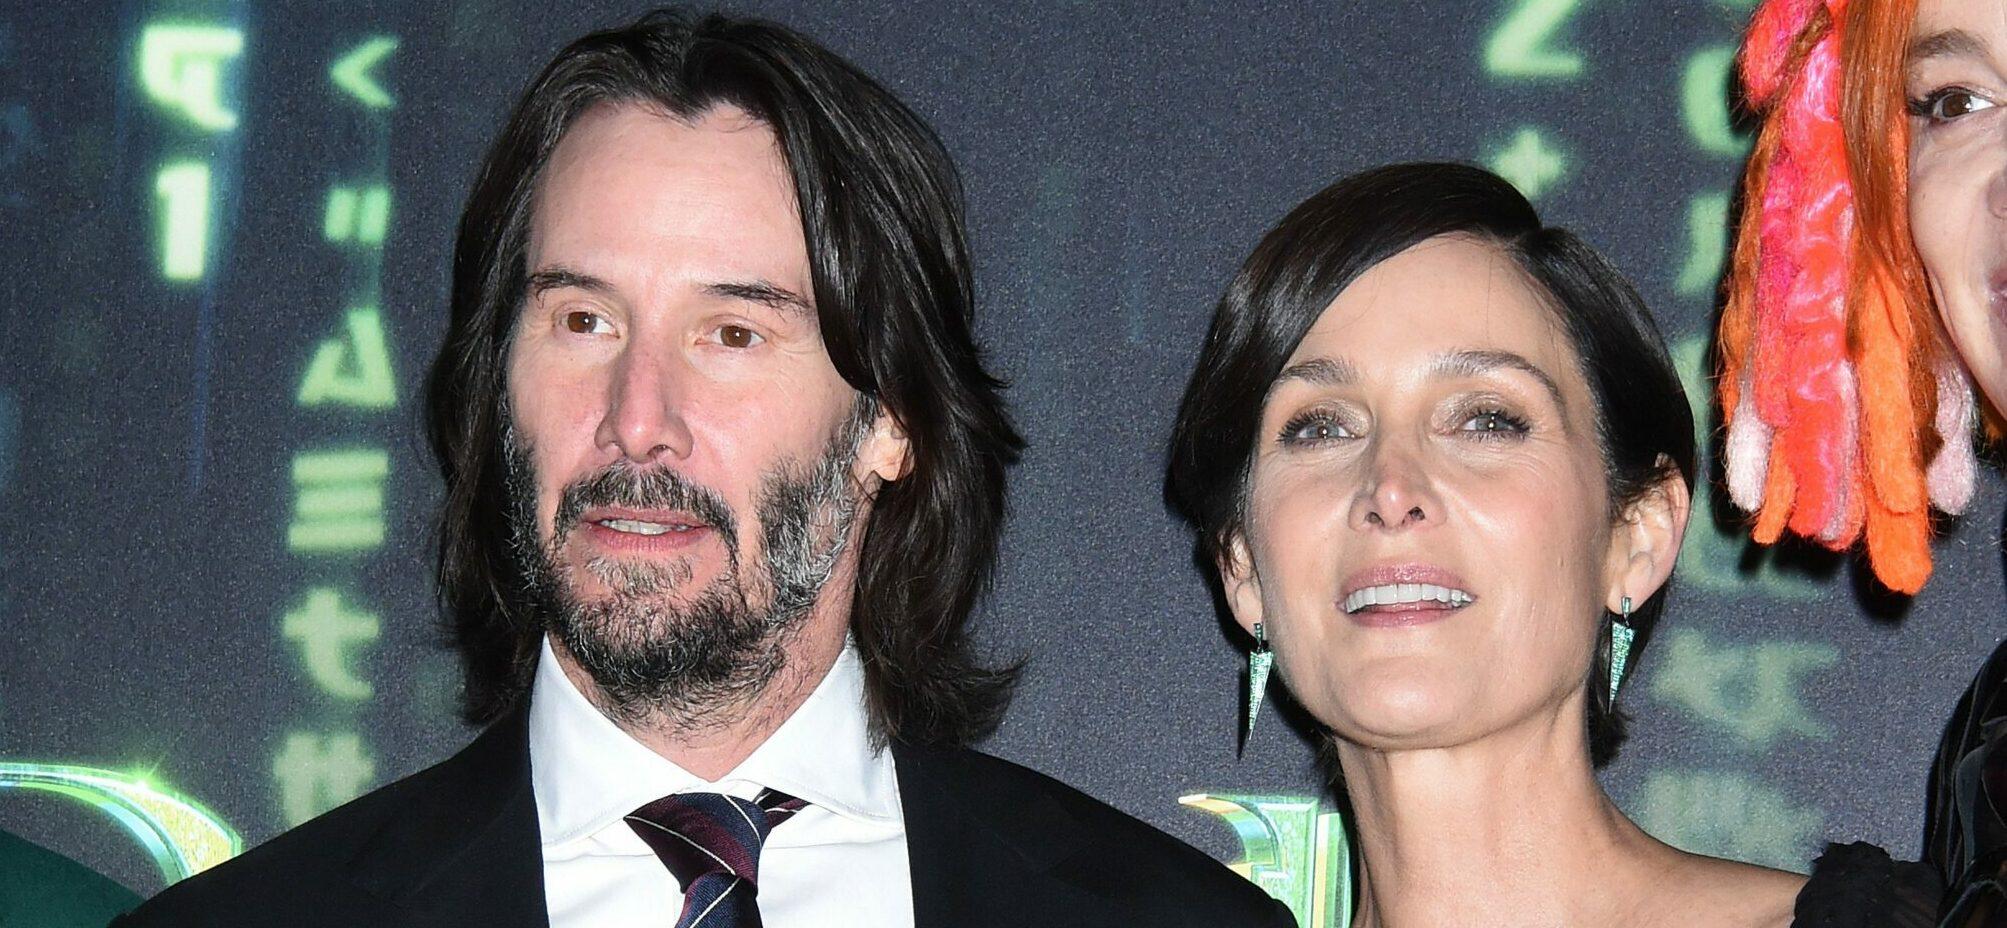 Keanu Reeves and Carrie-Anne Moss posing for the camera.